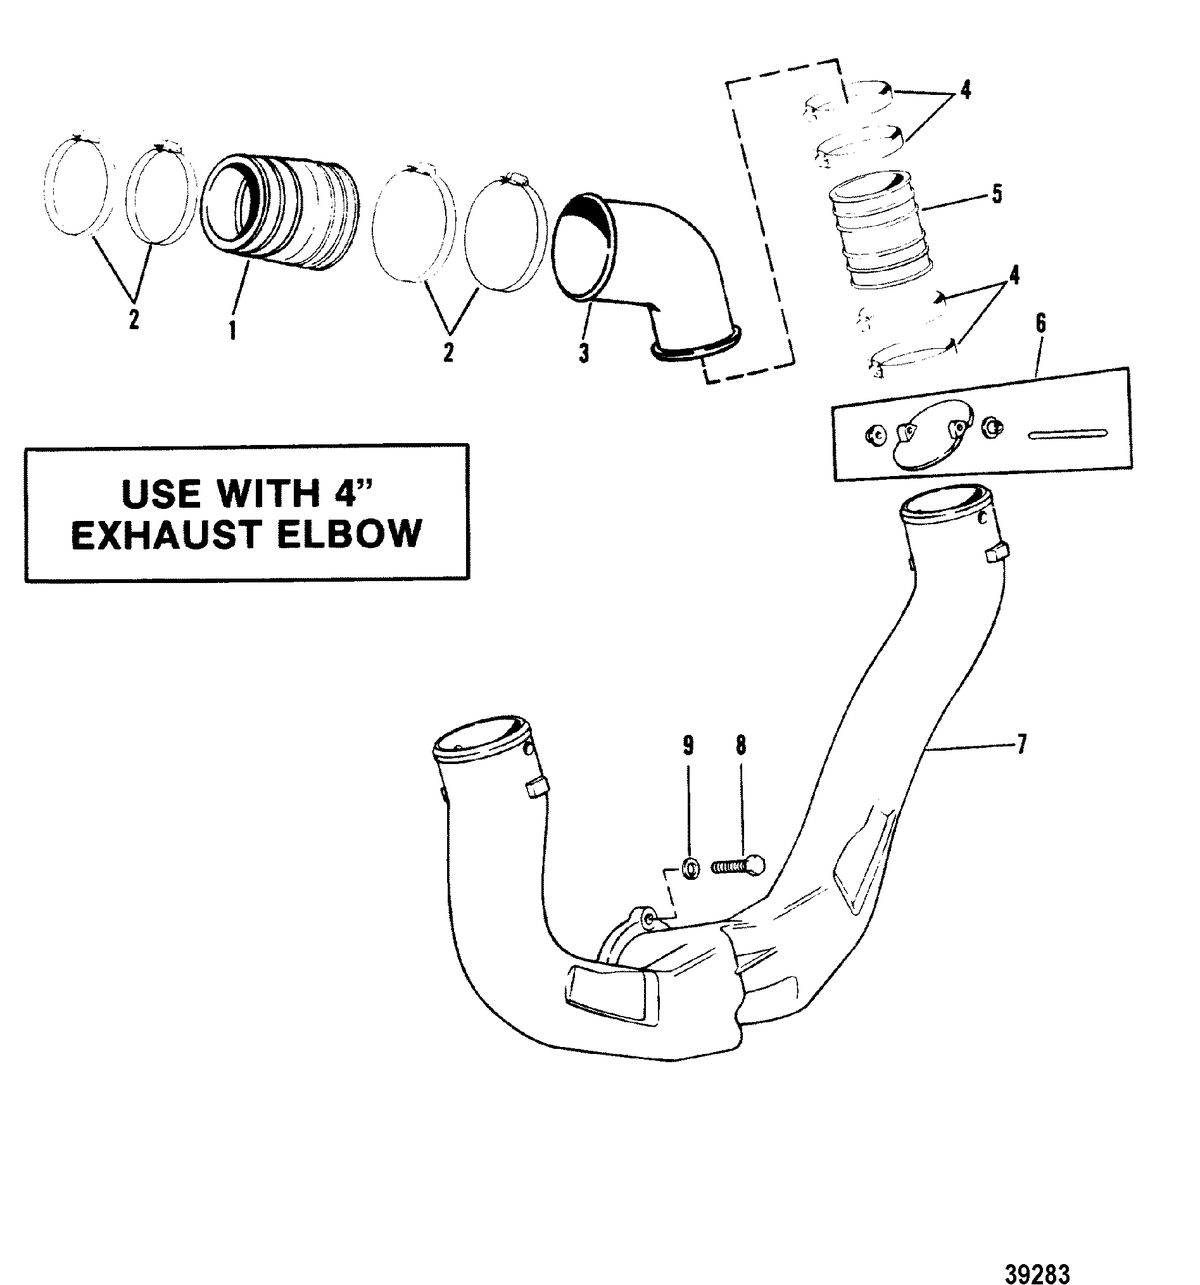 MERCRUISER 185/205 H.P. MR/ALPHA ONE ENGINE Exhaust System(4 In. Exhaust Elbow)